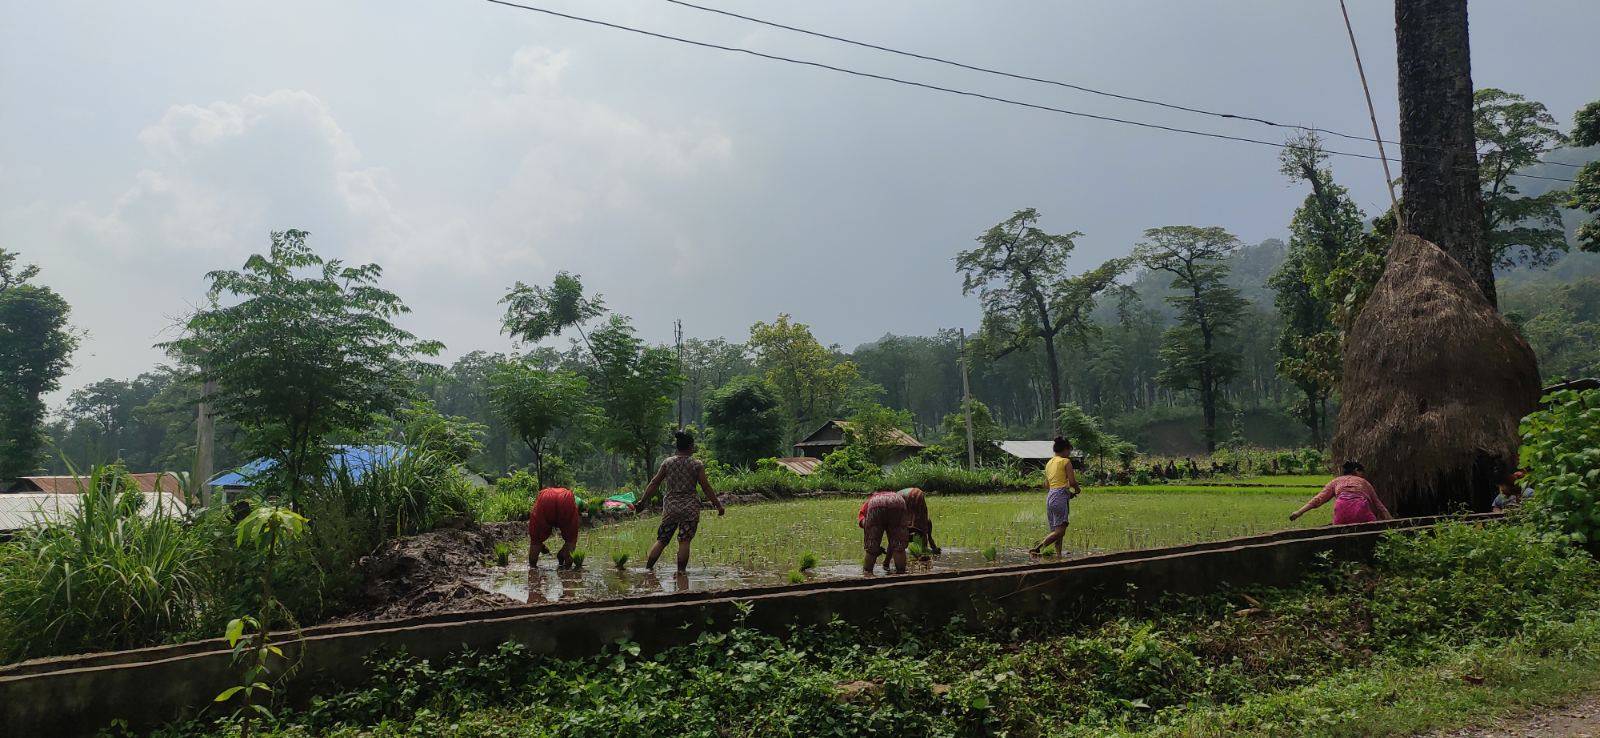 Local farmers planting paddy in the farms. Usually, after the maize production are completed, the farmers go for the paddy cultivation.